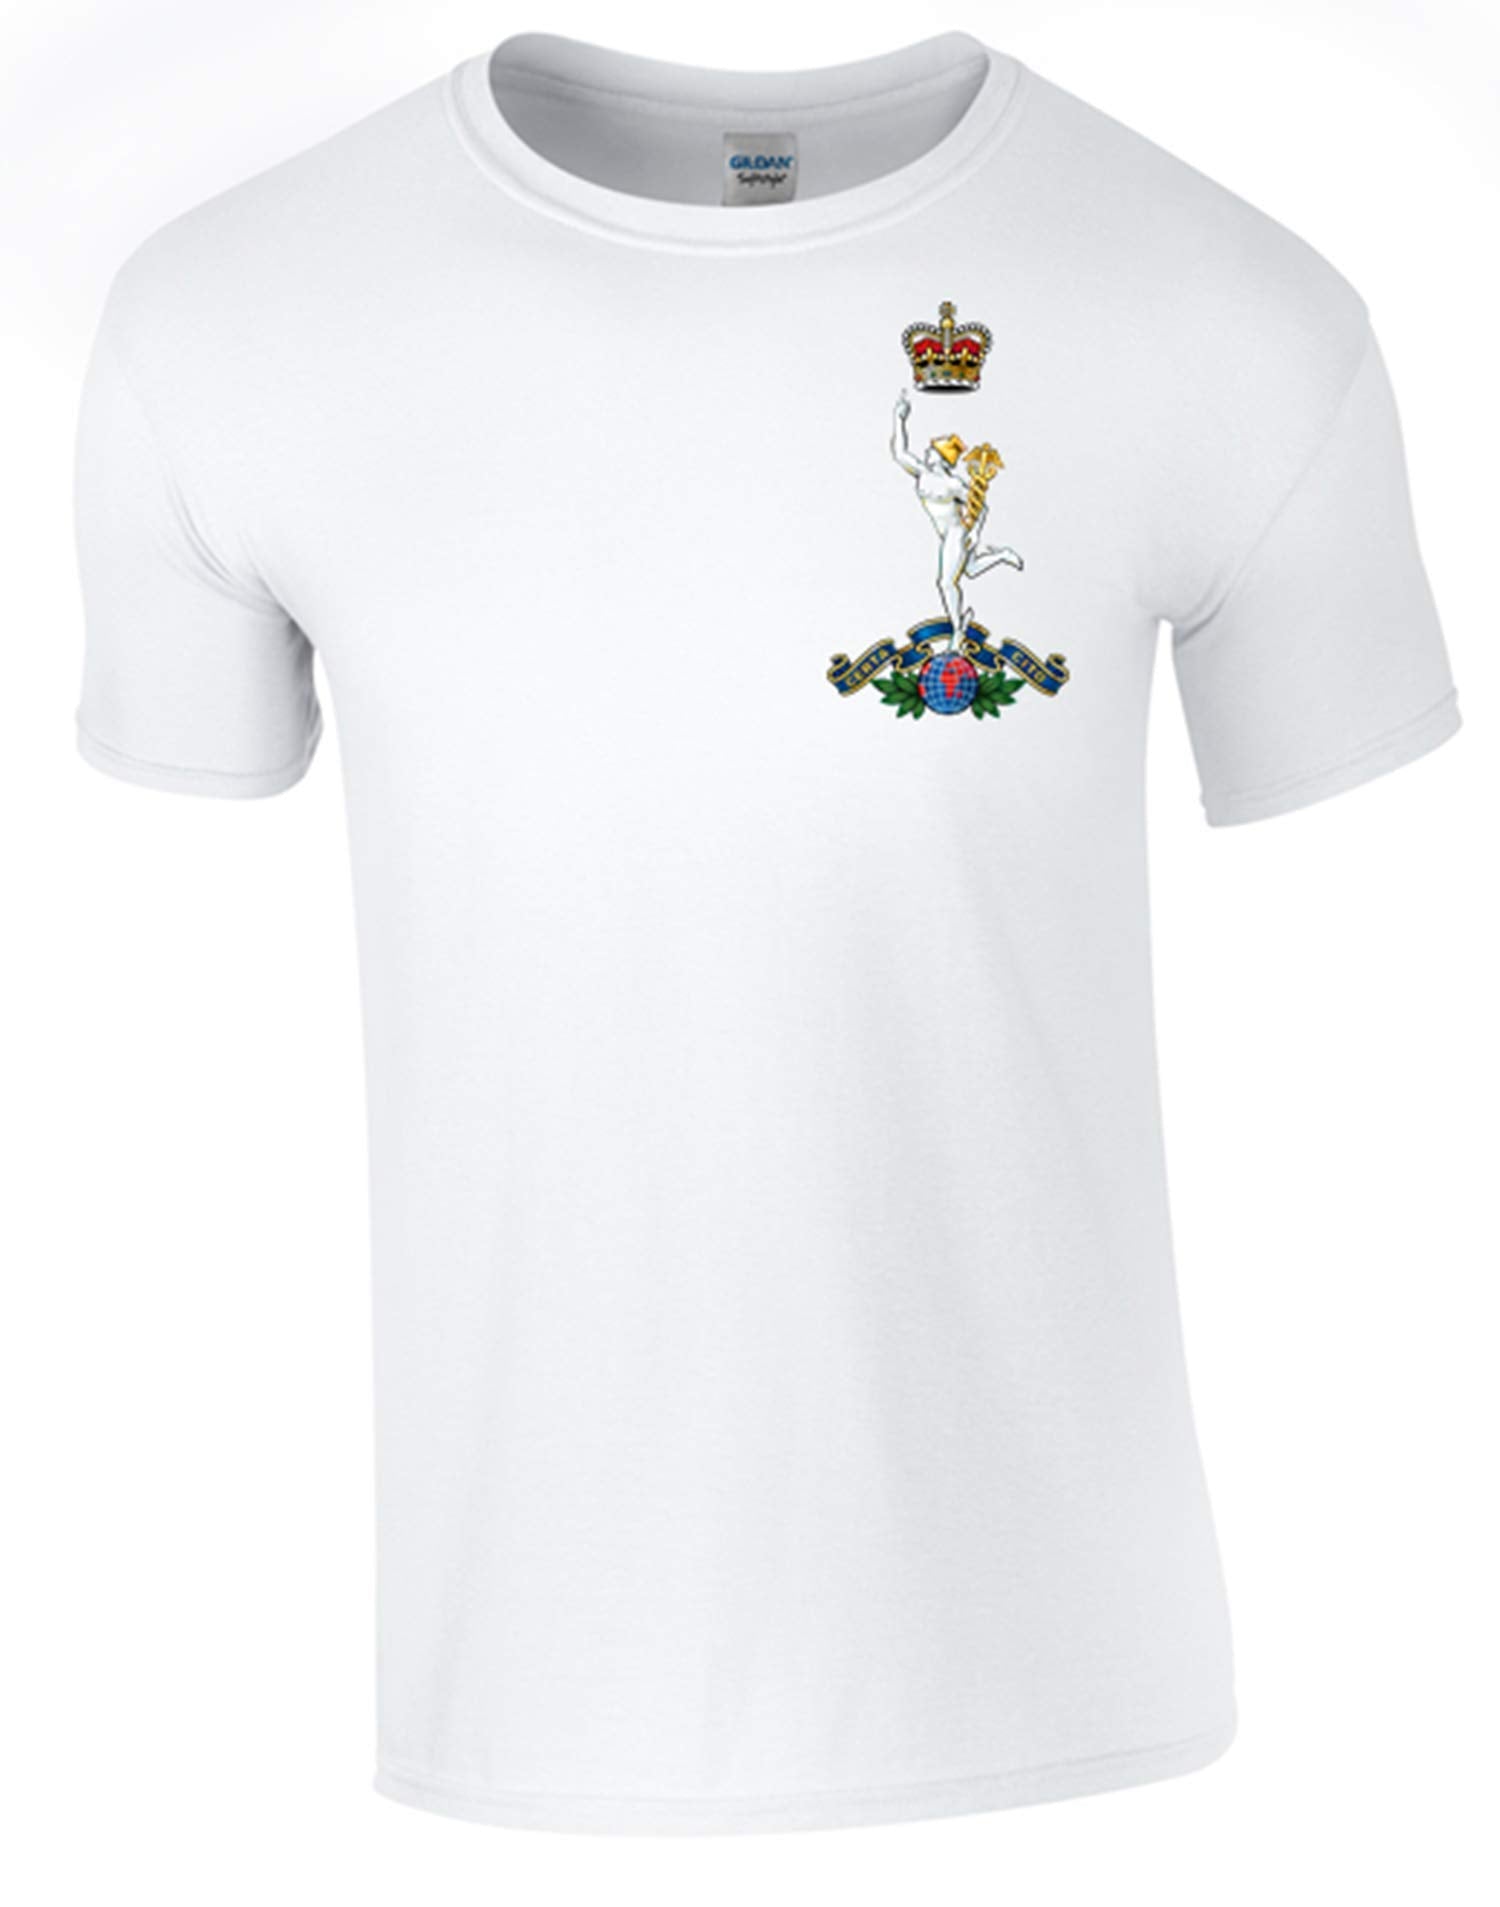 Royal Signals T-Shirt Official MOD Approved Merchandise - Army 1157 kit White / 3XL Army 1157 Kit